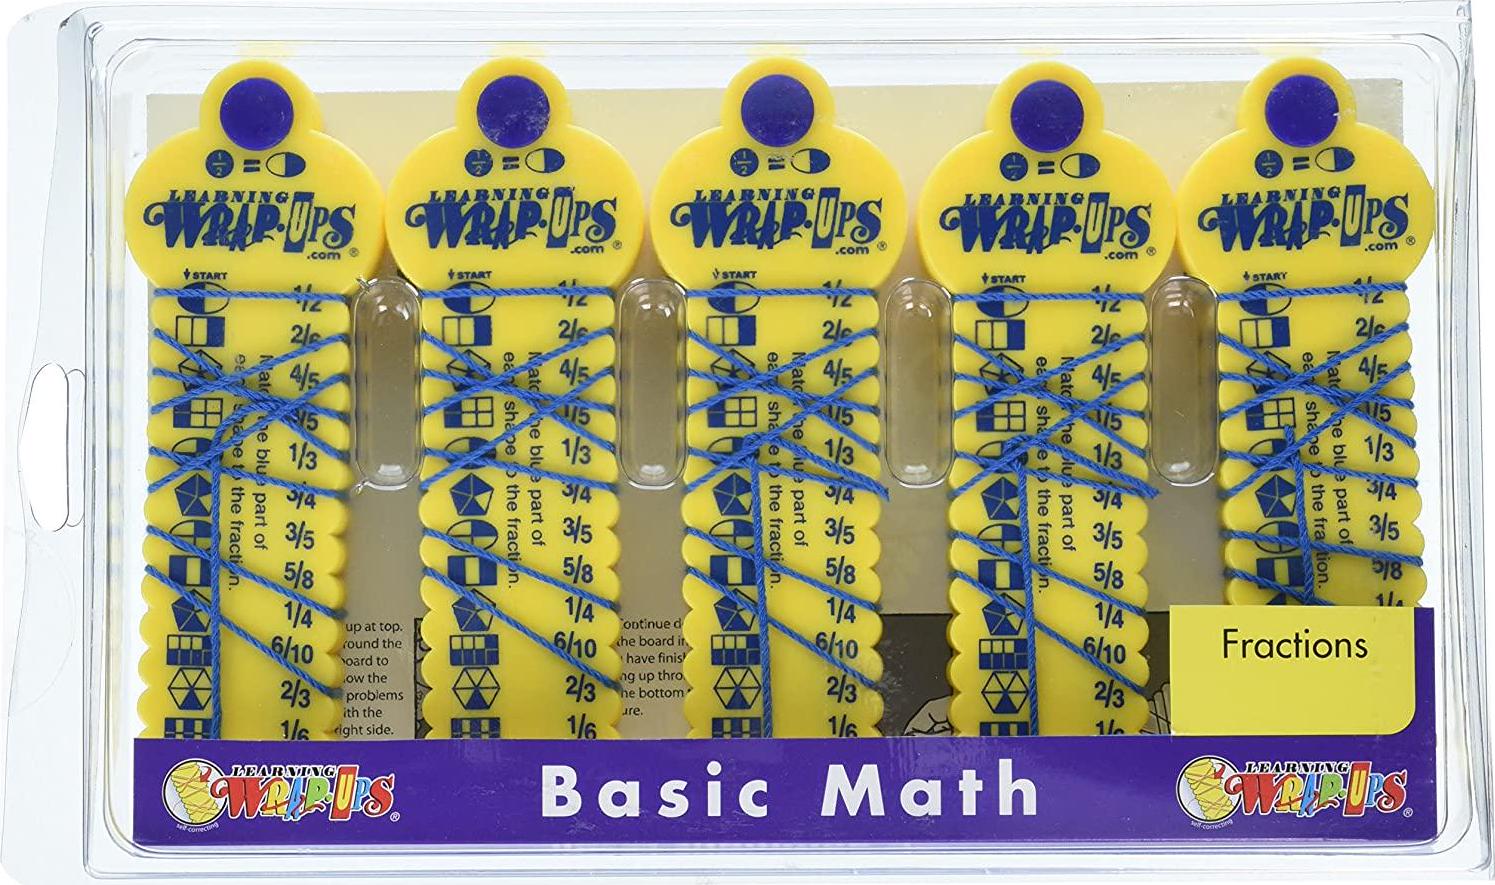 Learning Wrap-Ups, Learning Wrap-ups Fraction Kit with Self Correcting Math Problems